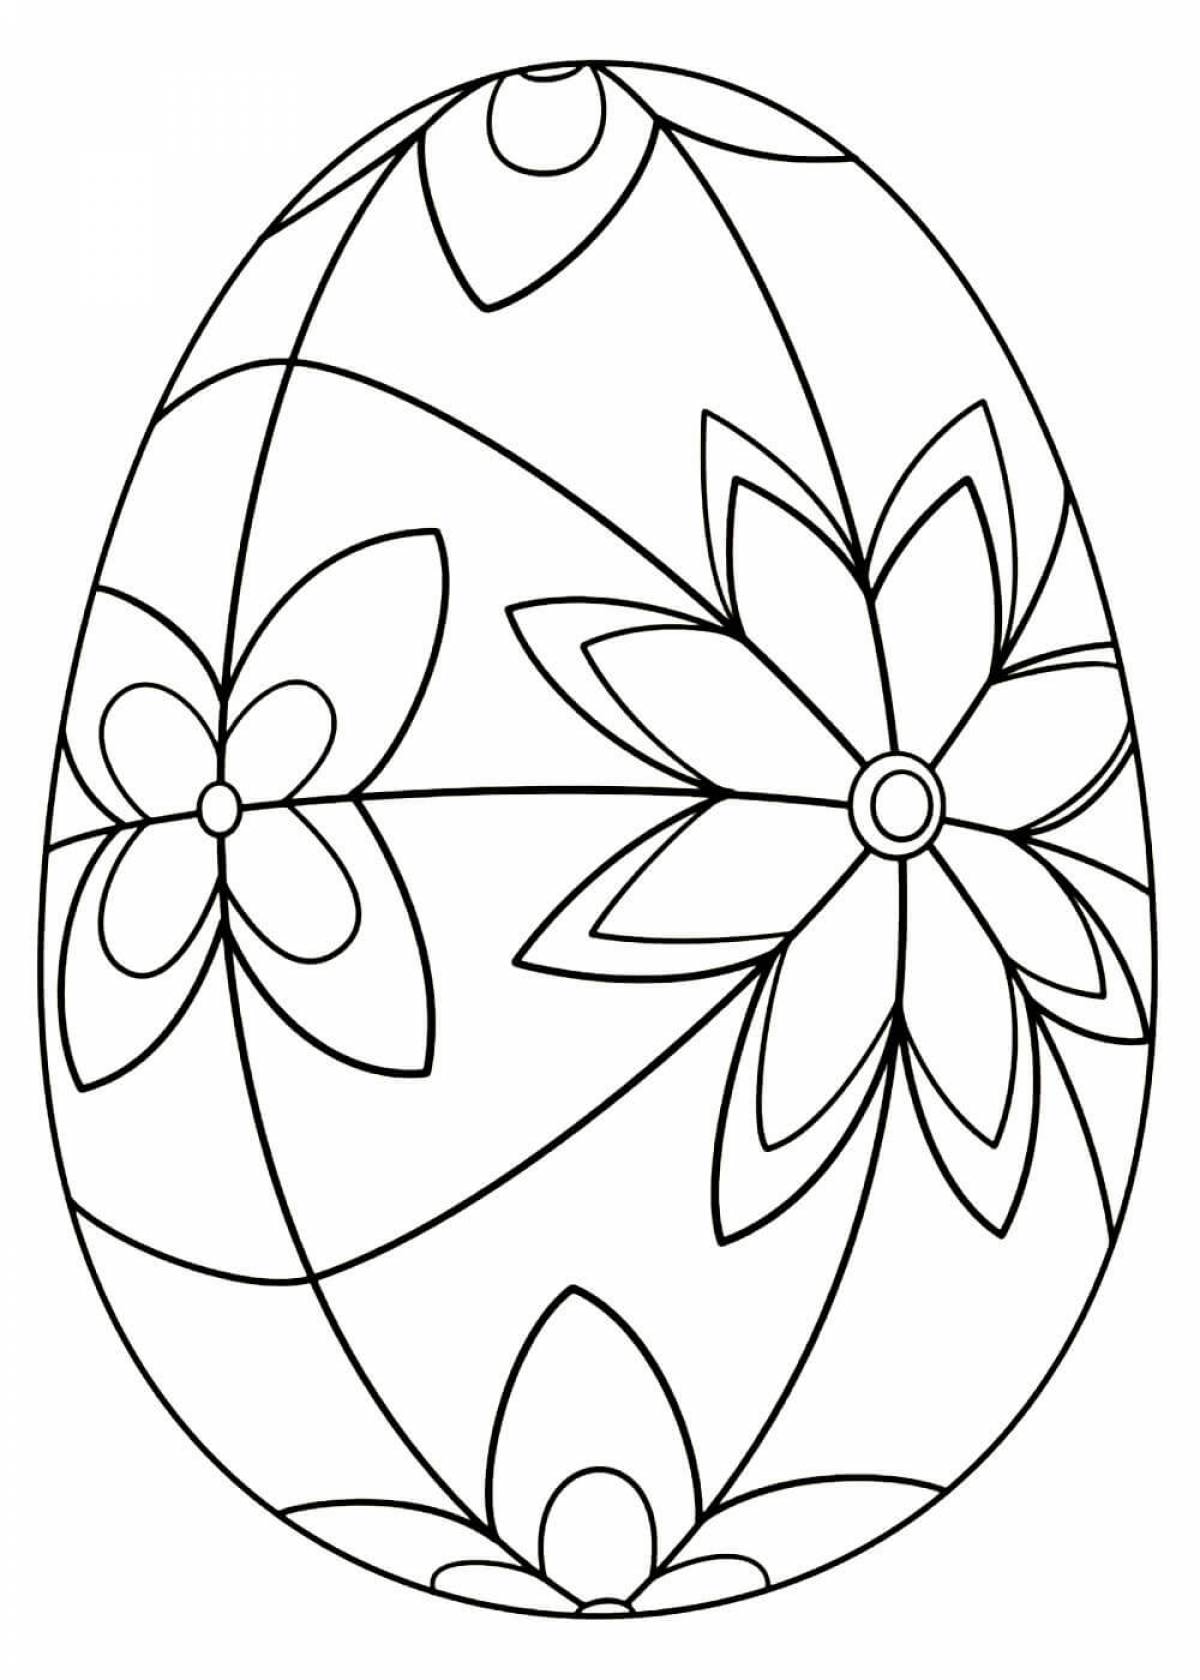 Egg with a flower